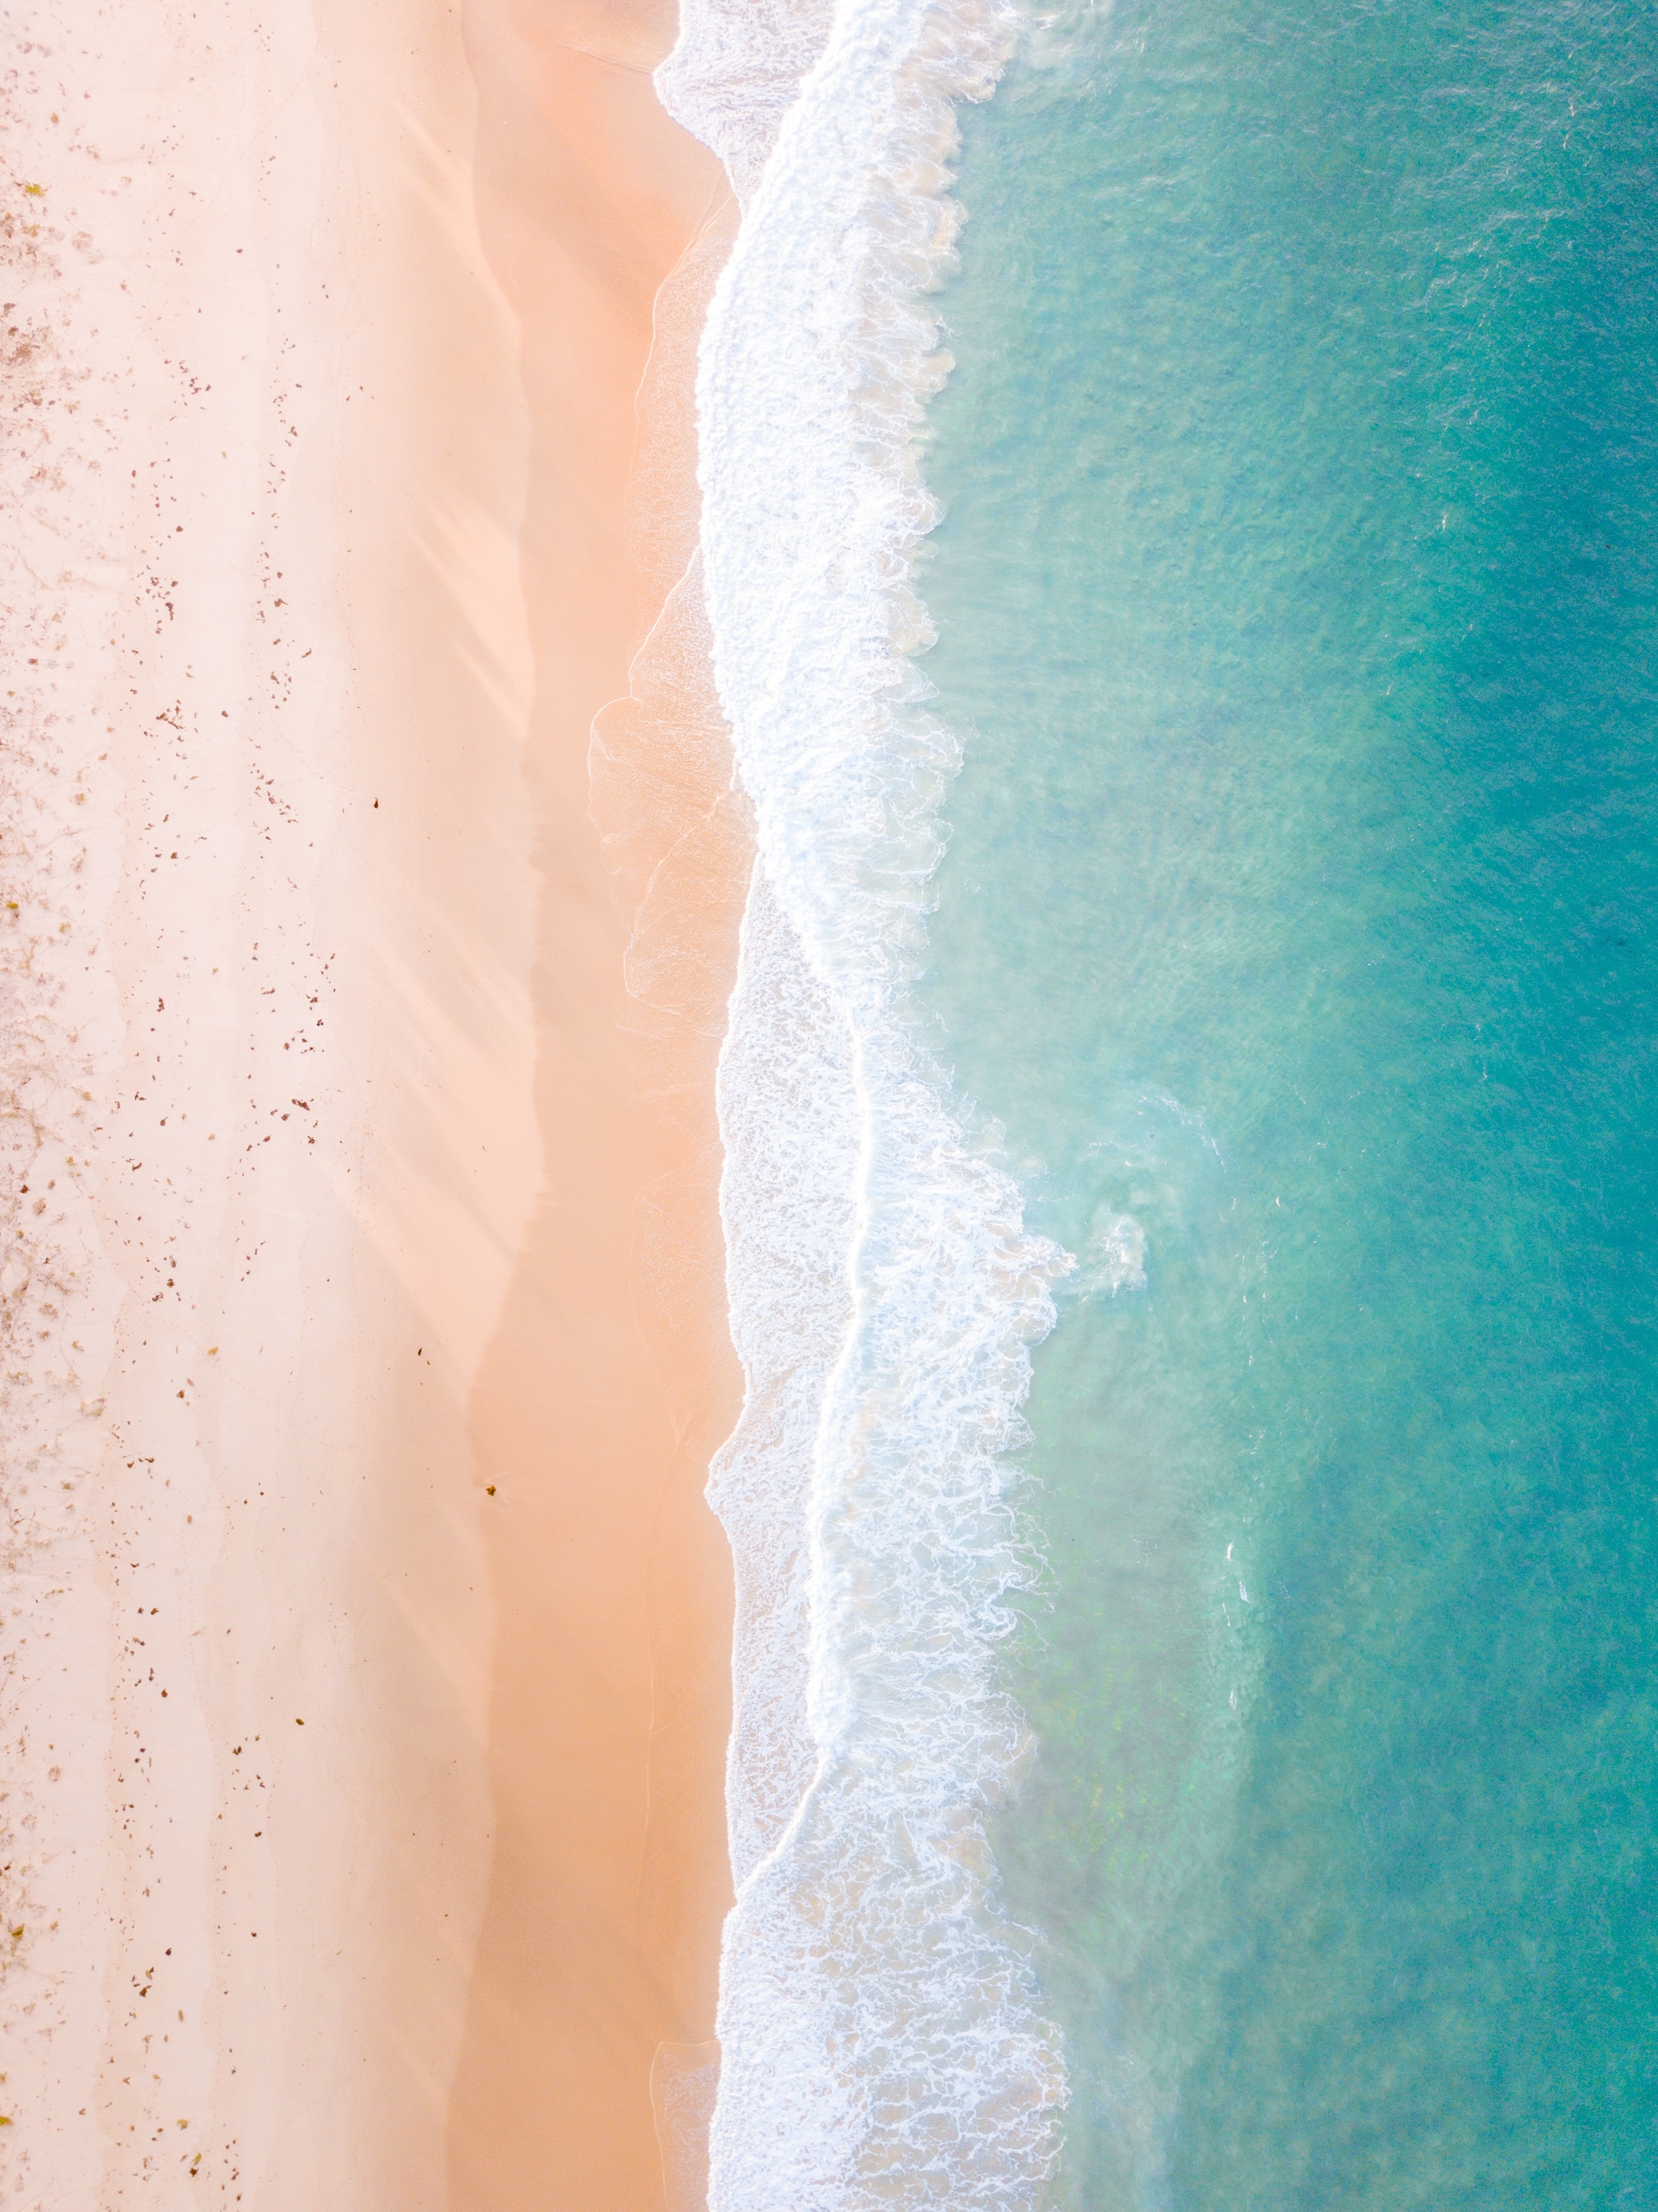 sea, nature, beach, view from above, surf, wave